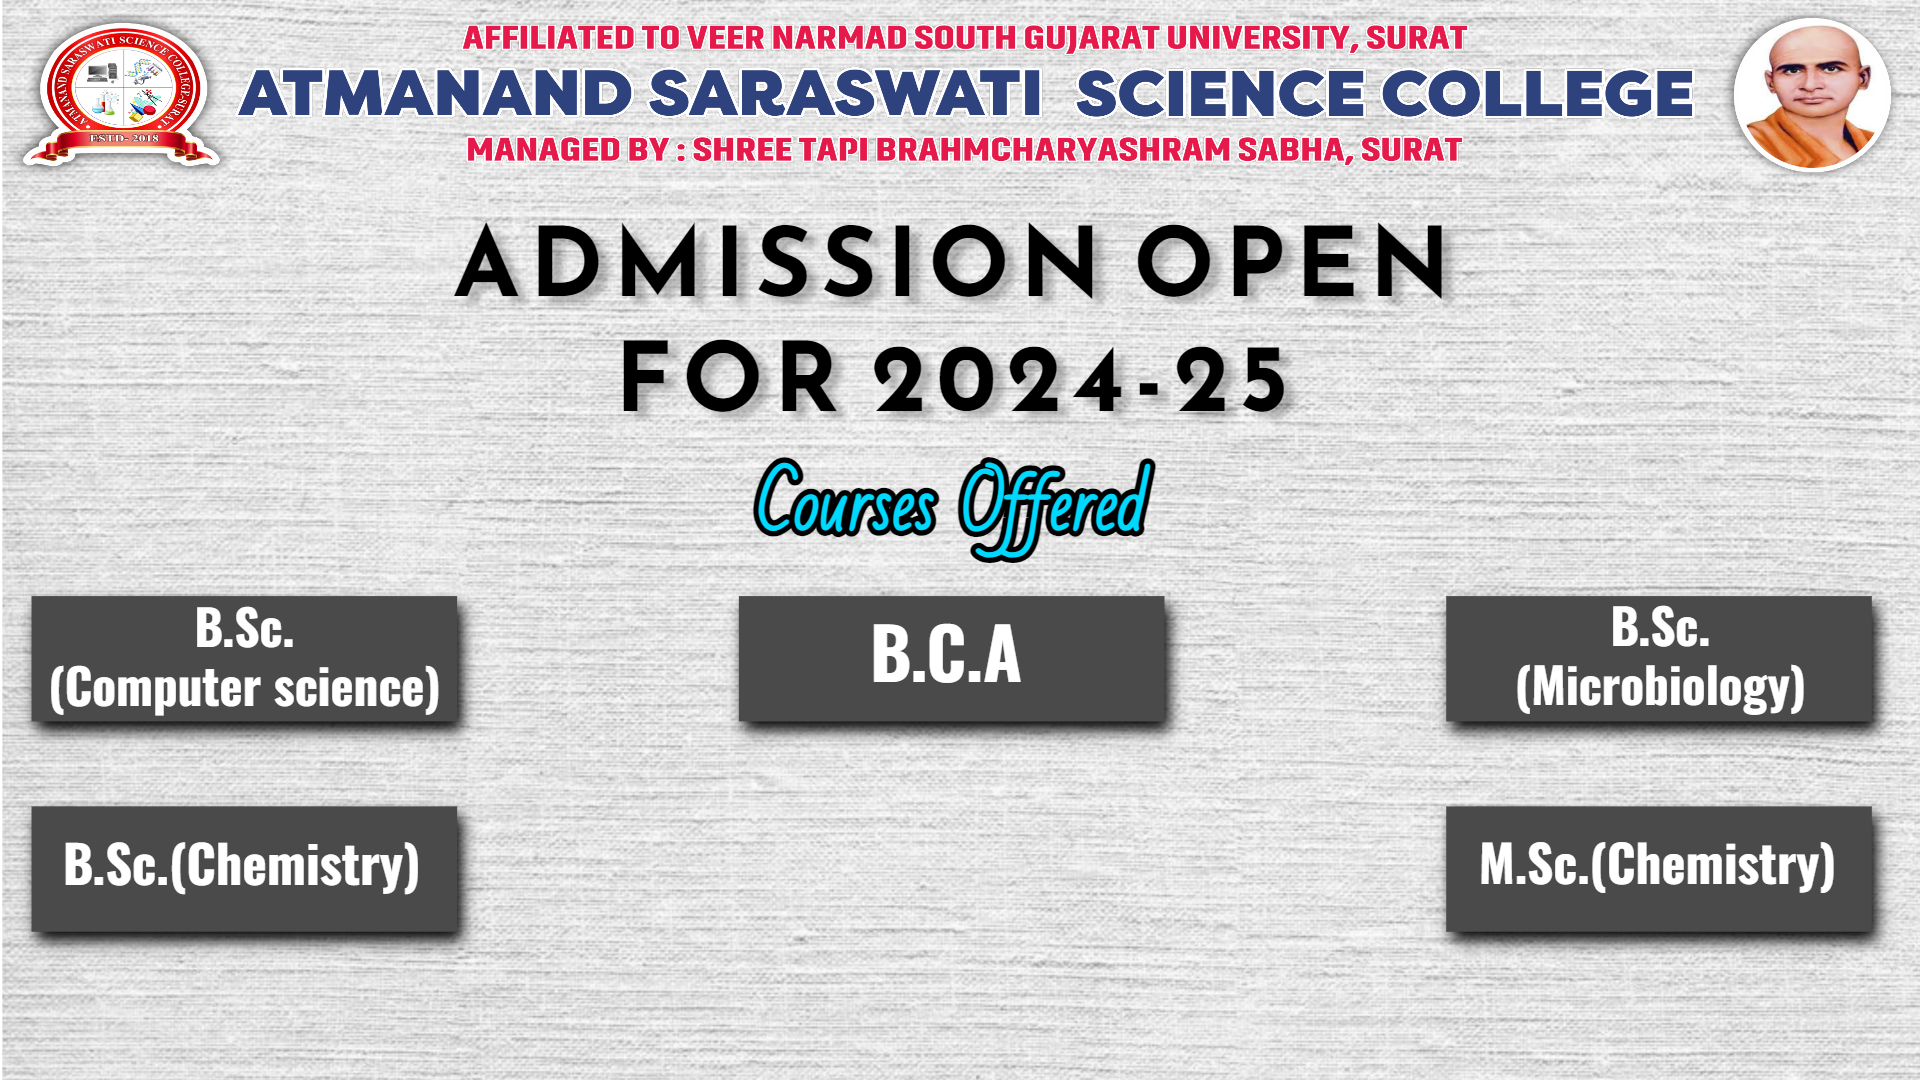 admission-open-for-2024-25-courses-offered (1)